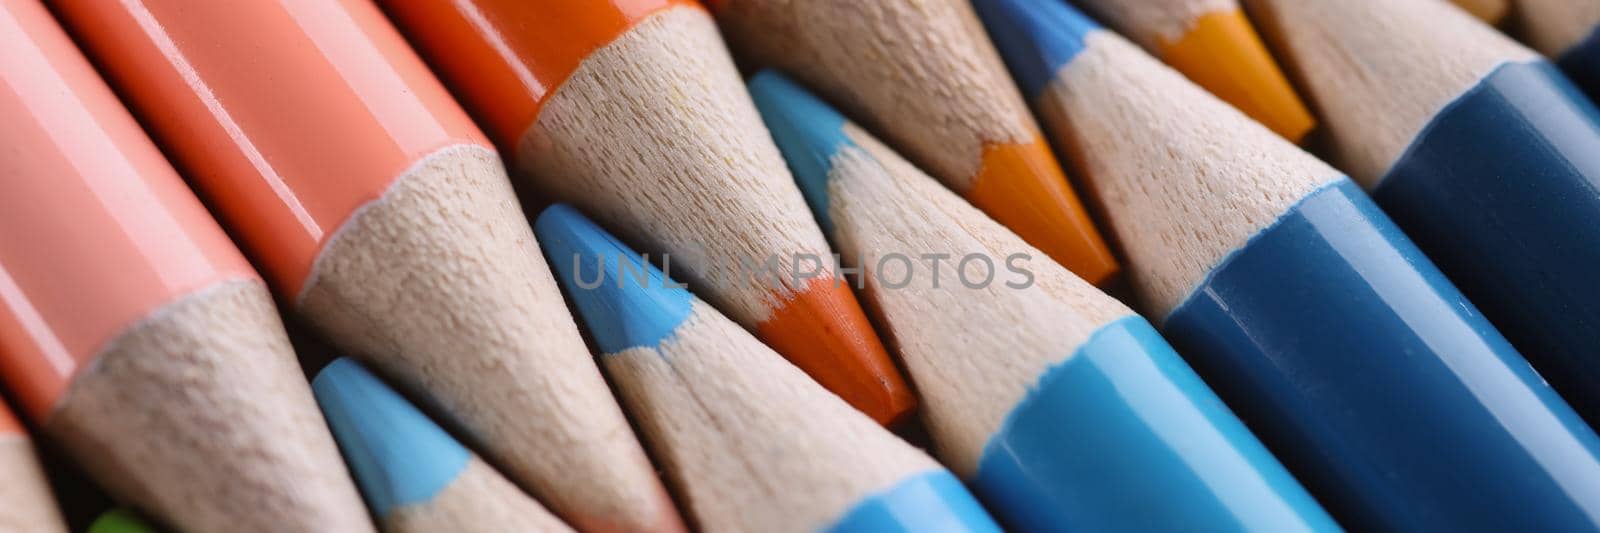 Bunch of colourful sharpened pens by kuprevich